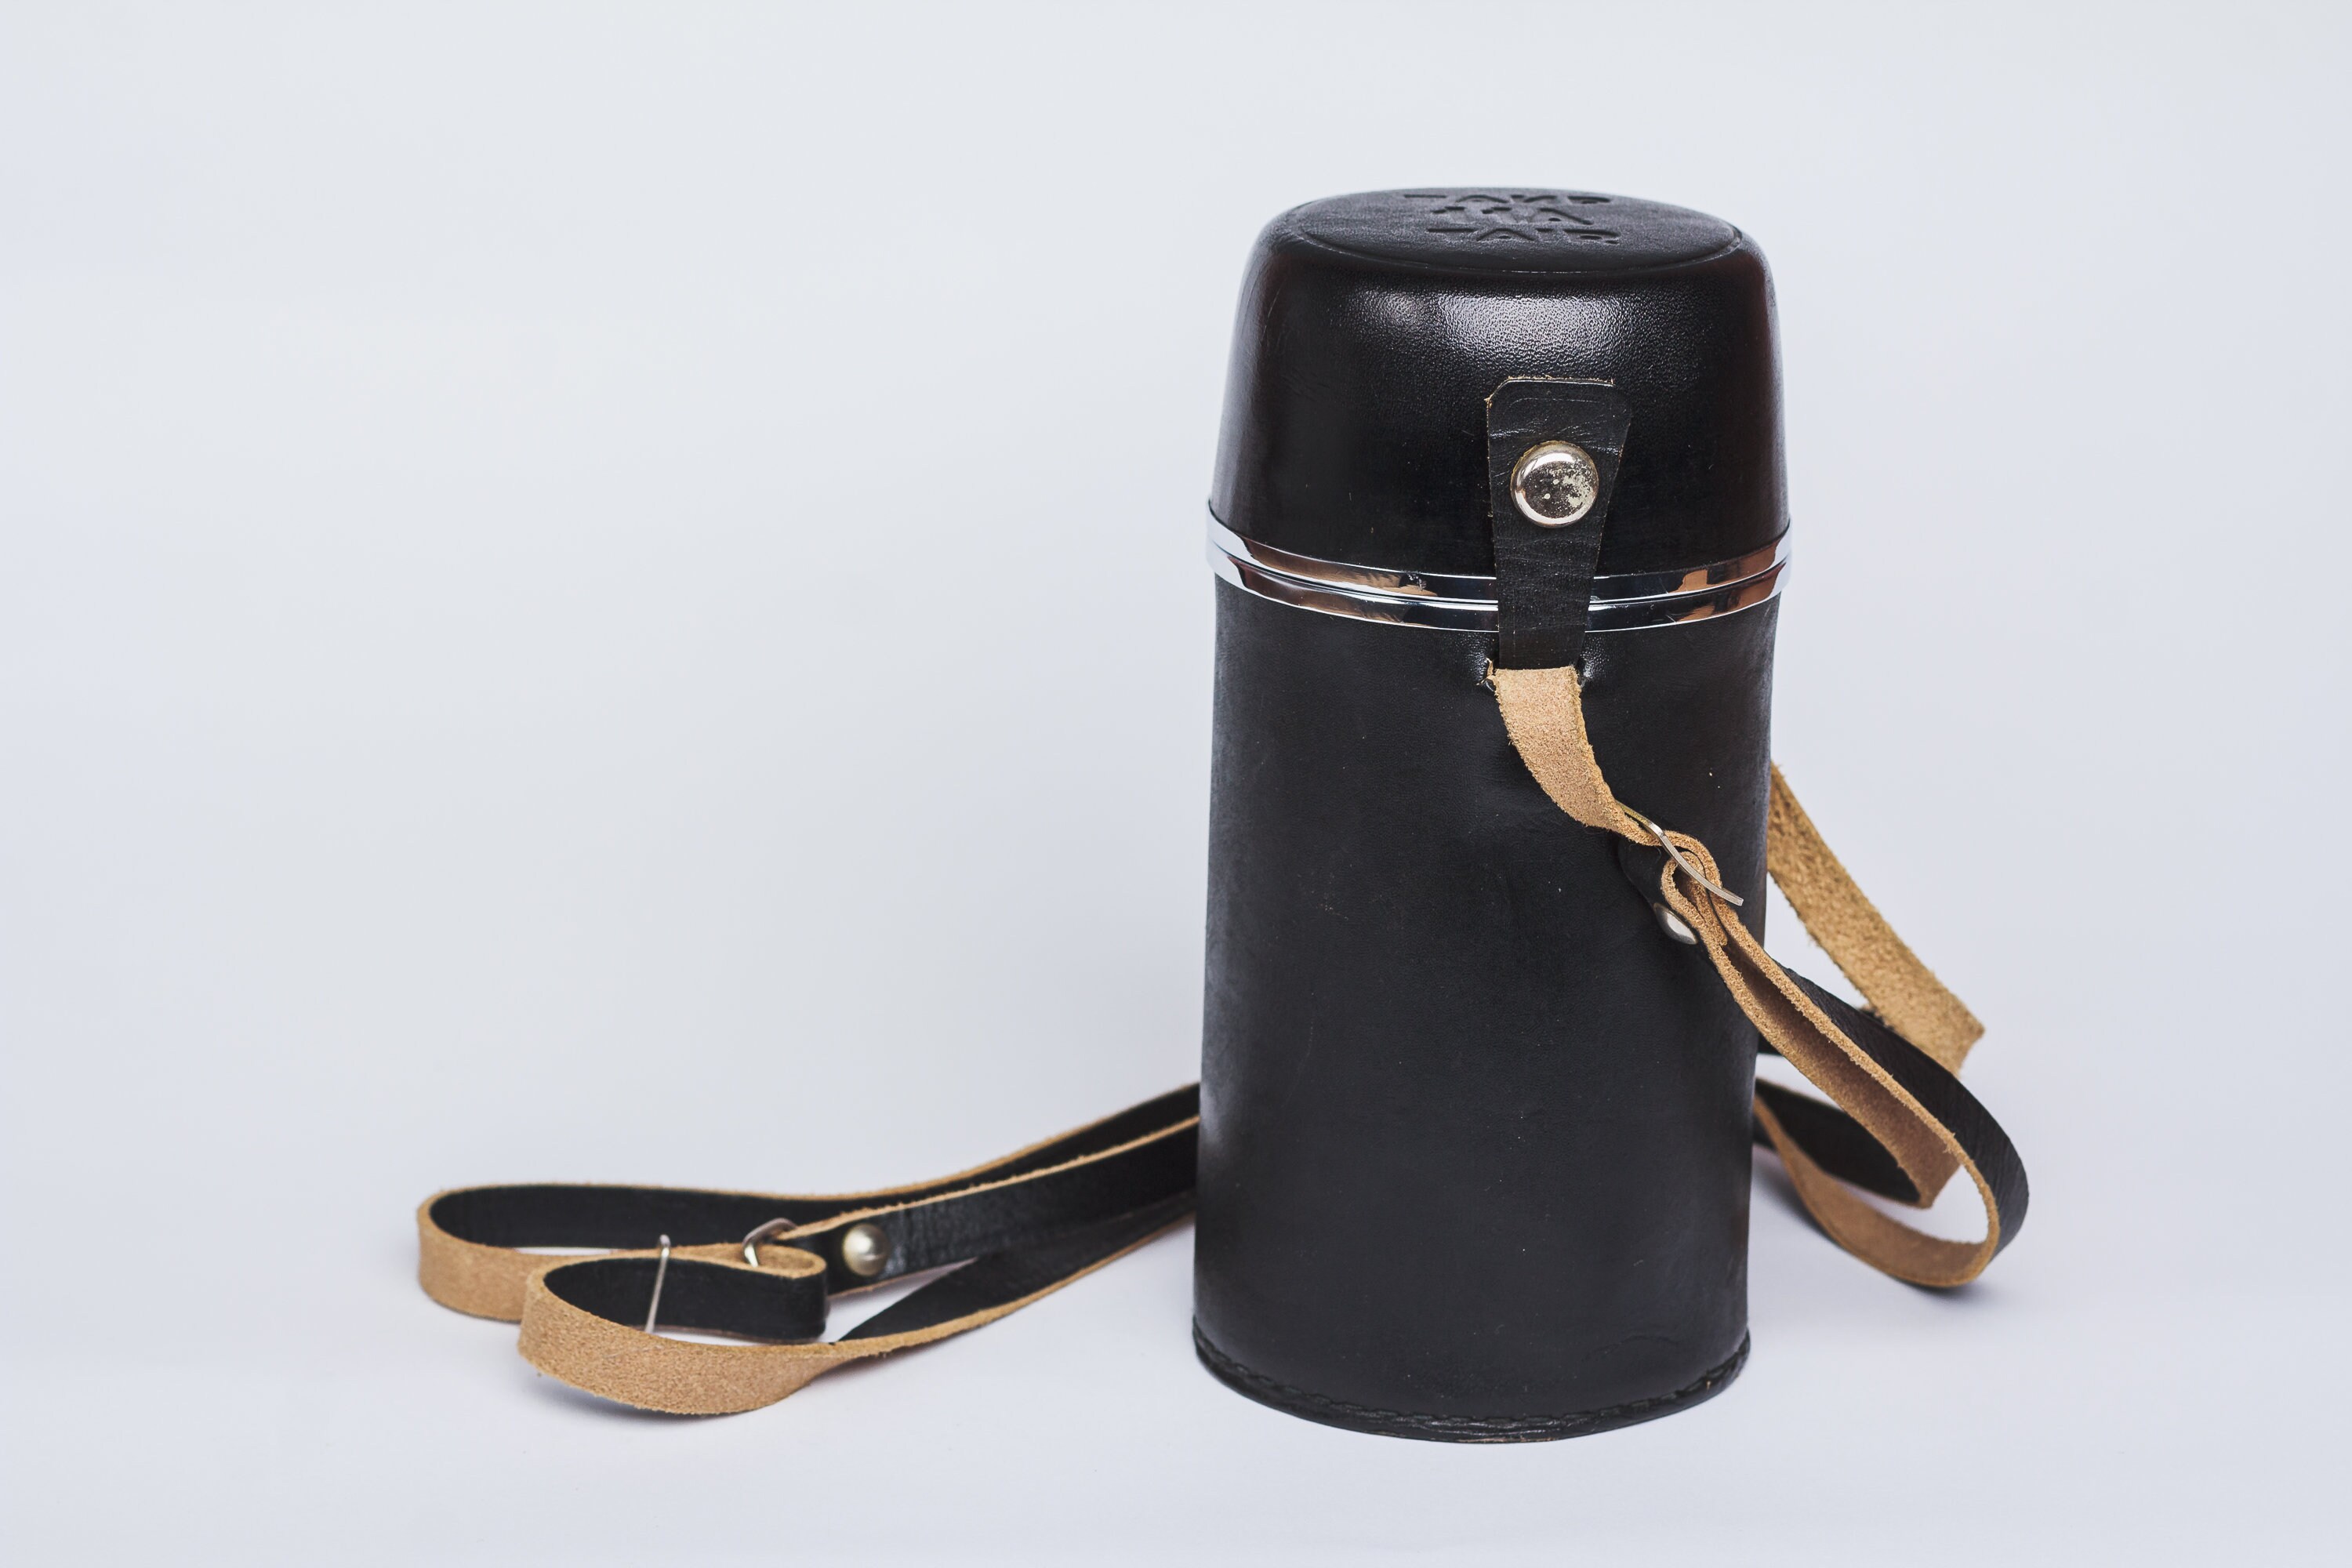 Thermos Leather Carrier – The Good Liver